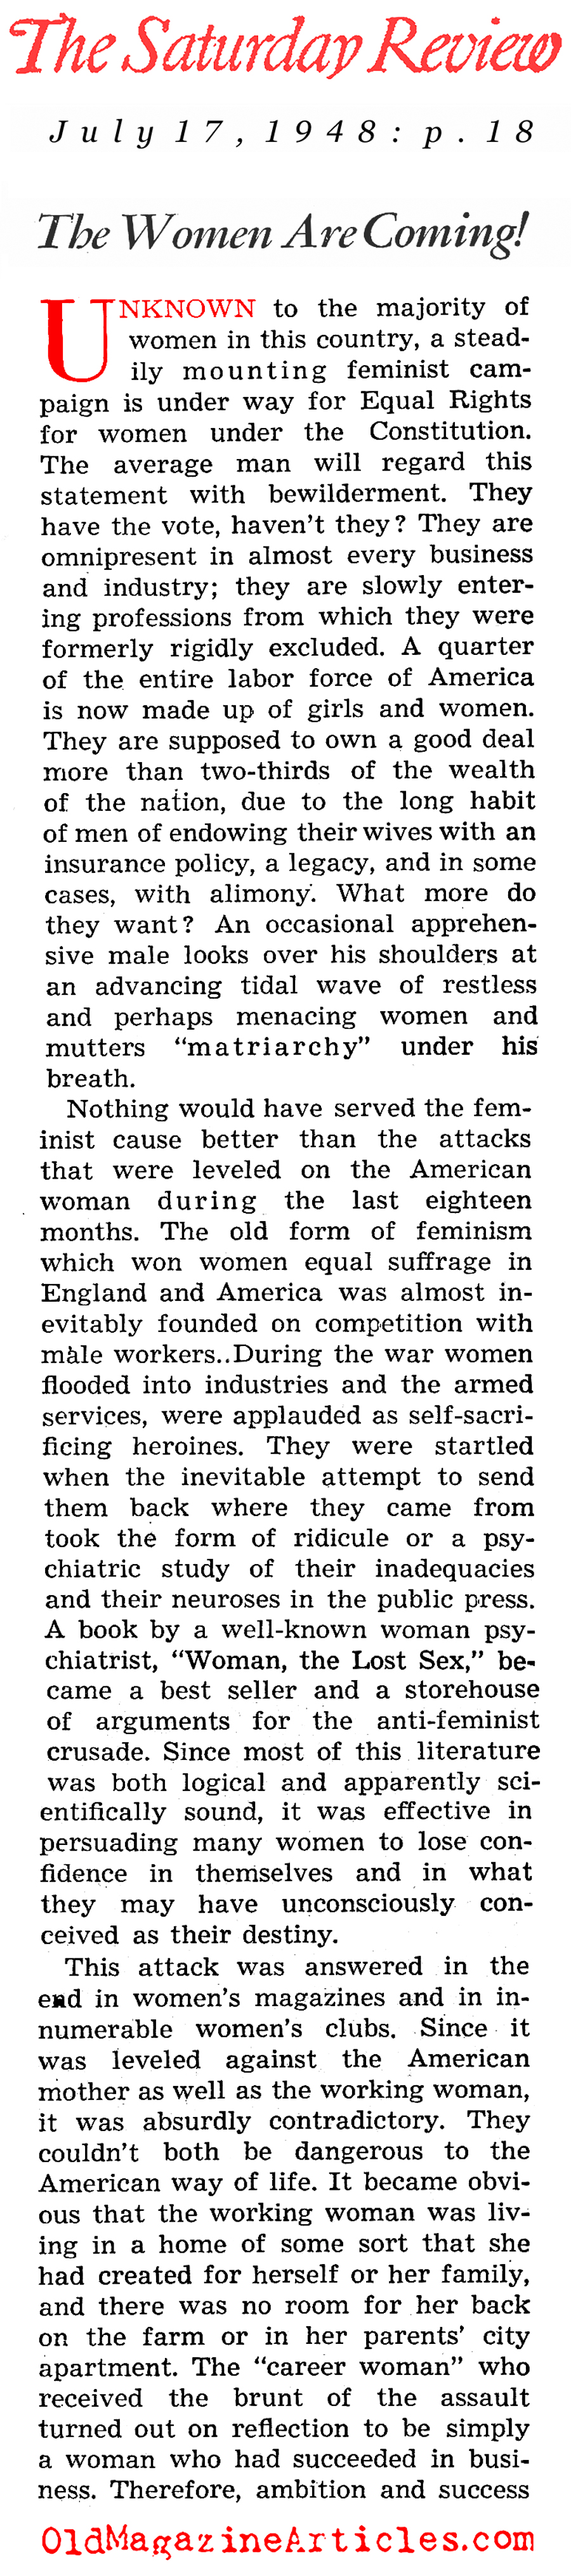 ''The Women Are Coming'' (The Saturday Review, 1948)